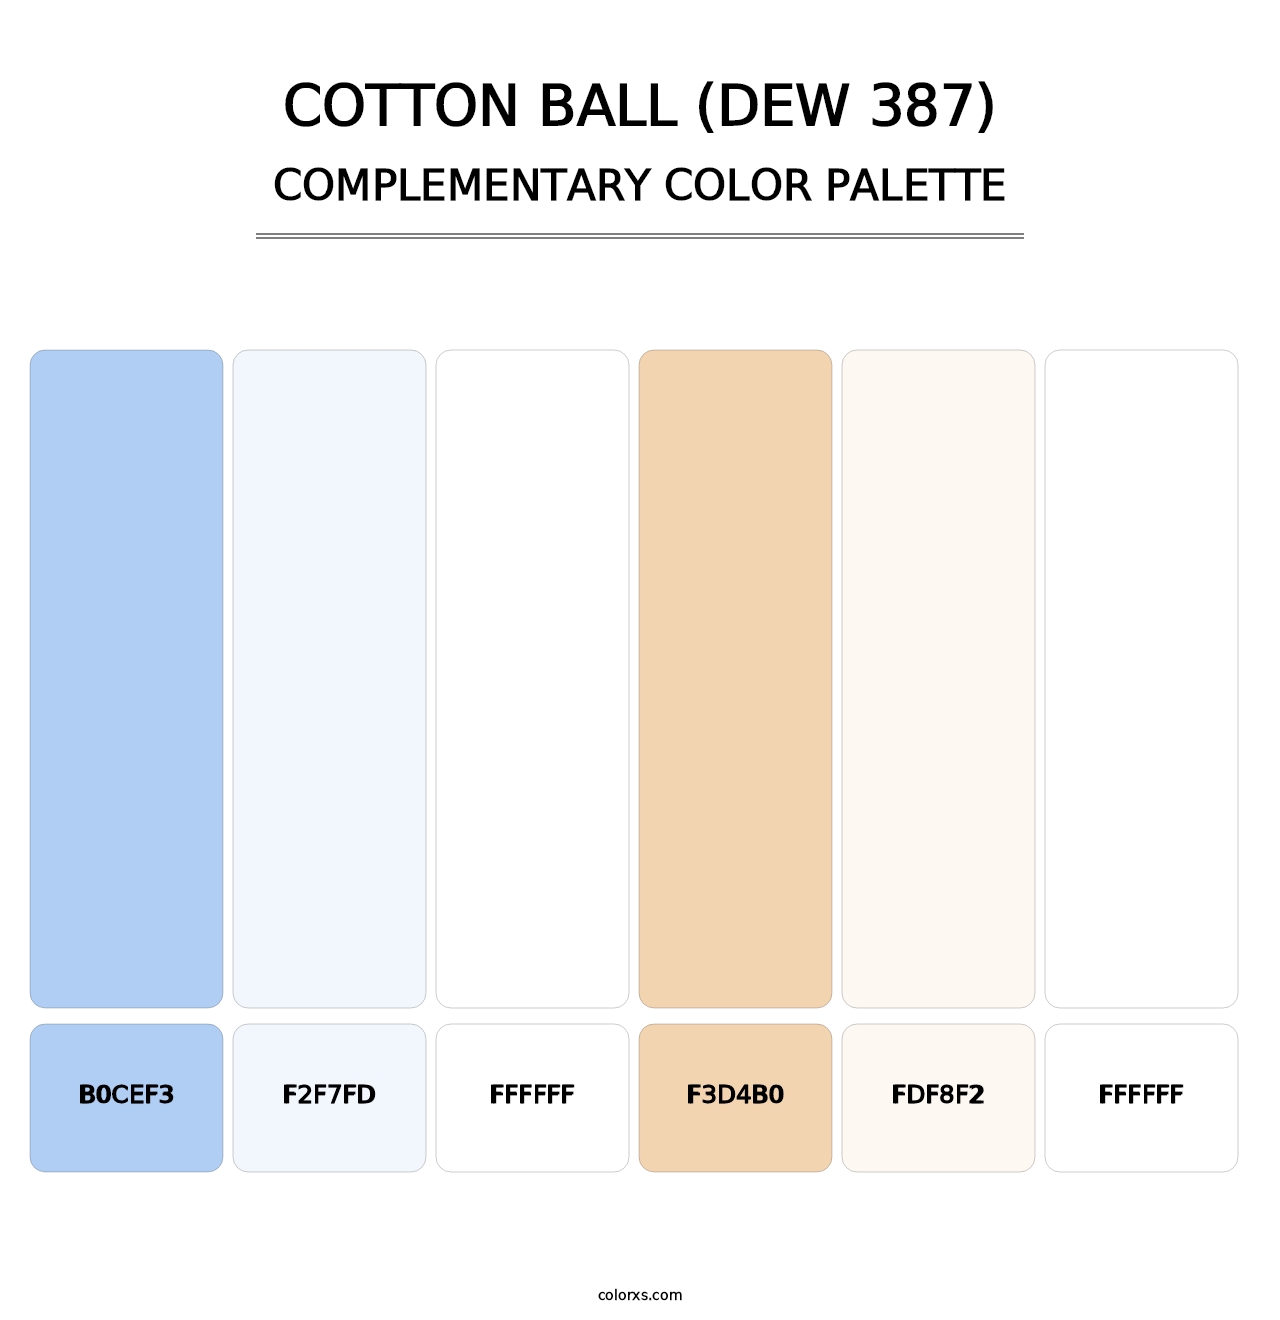 Cotton Ball (DEW 387) - Complementary Color Palette